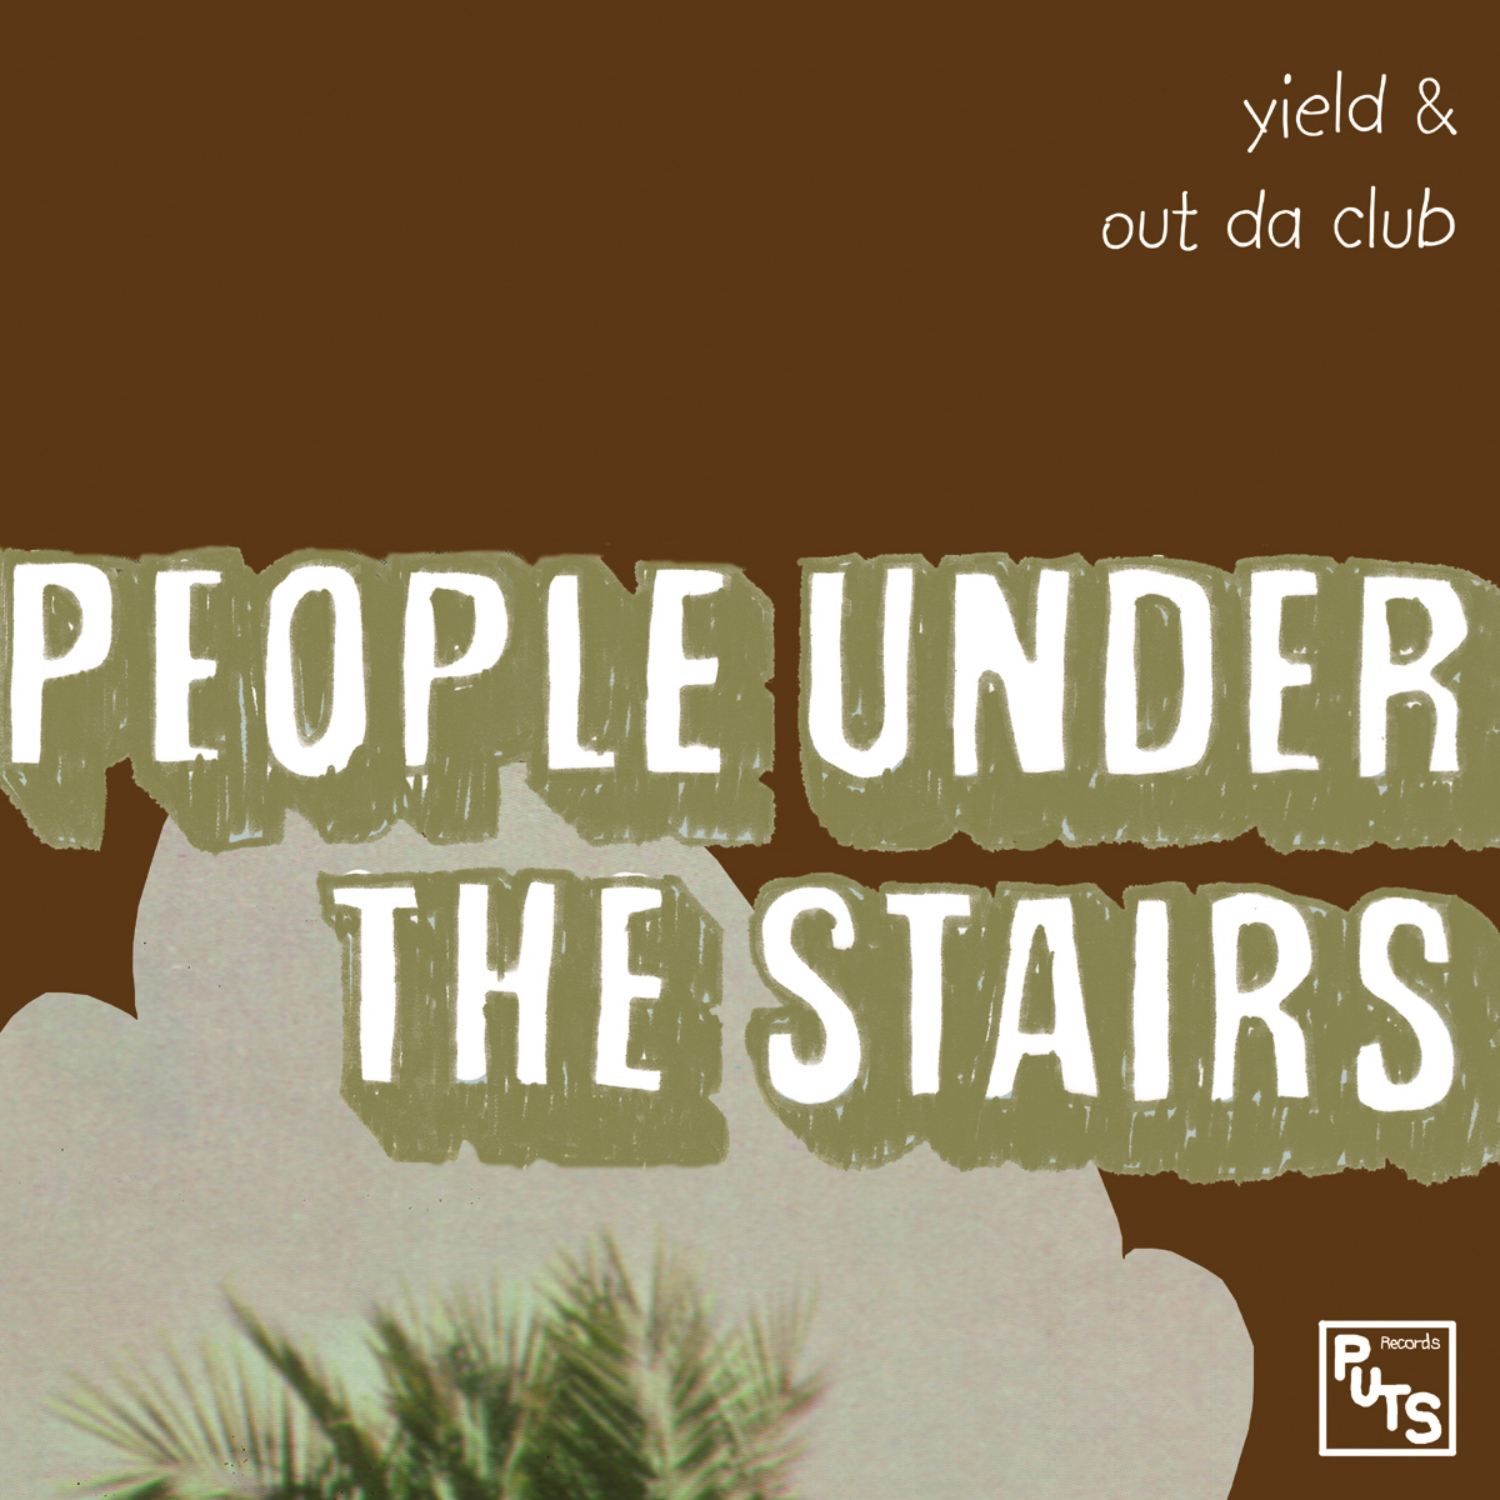 People Under The Stairs - Yield